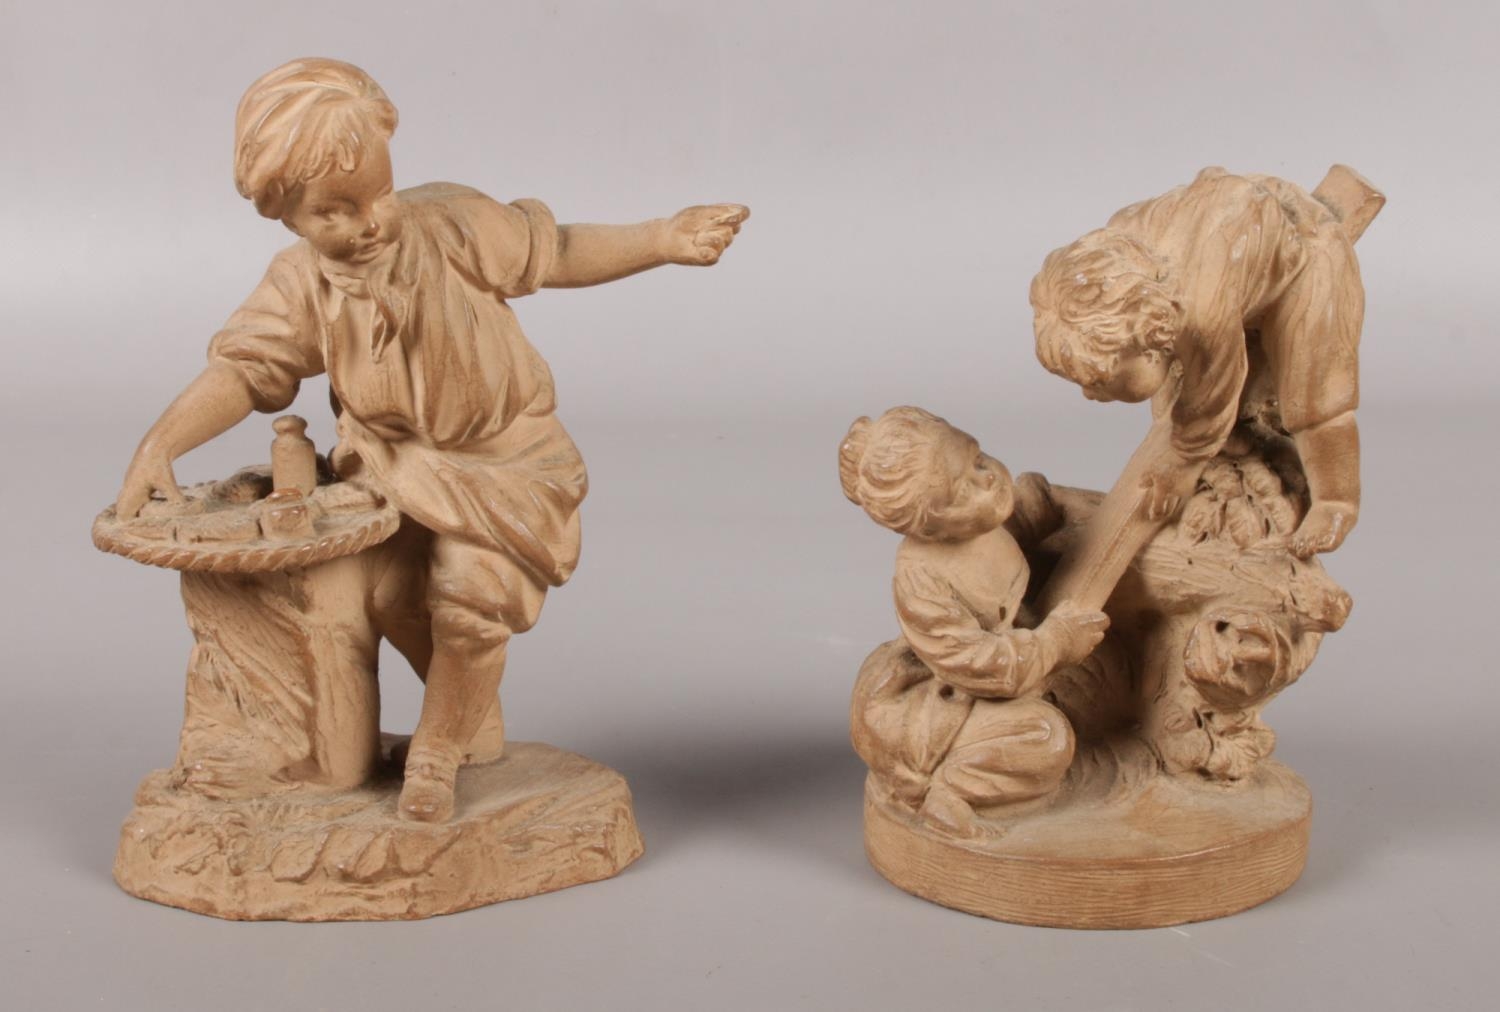 A pair of late 19th century French small terracotta sculptures. One of a young boy posing as a